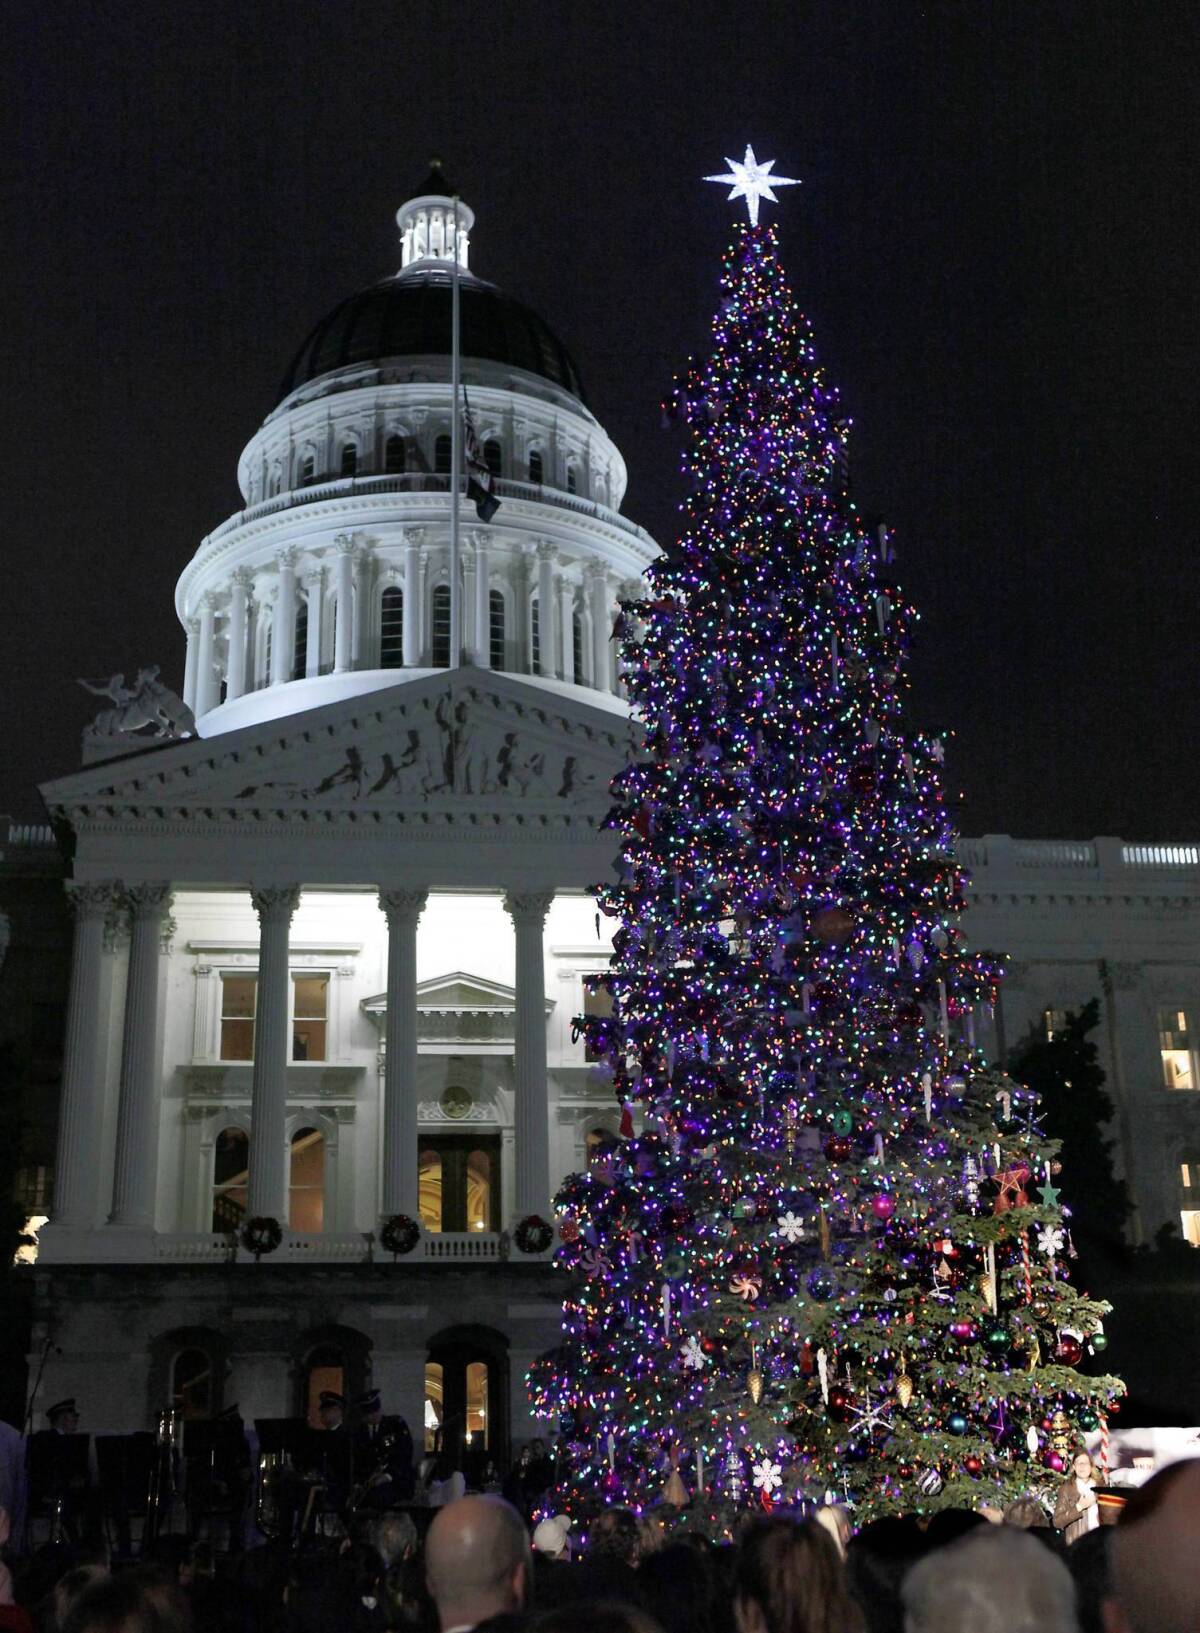 In Sacramento, the state Capitol Christmas tree from 10,000 ultra-low watt LED lights.